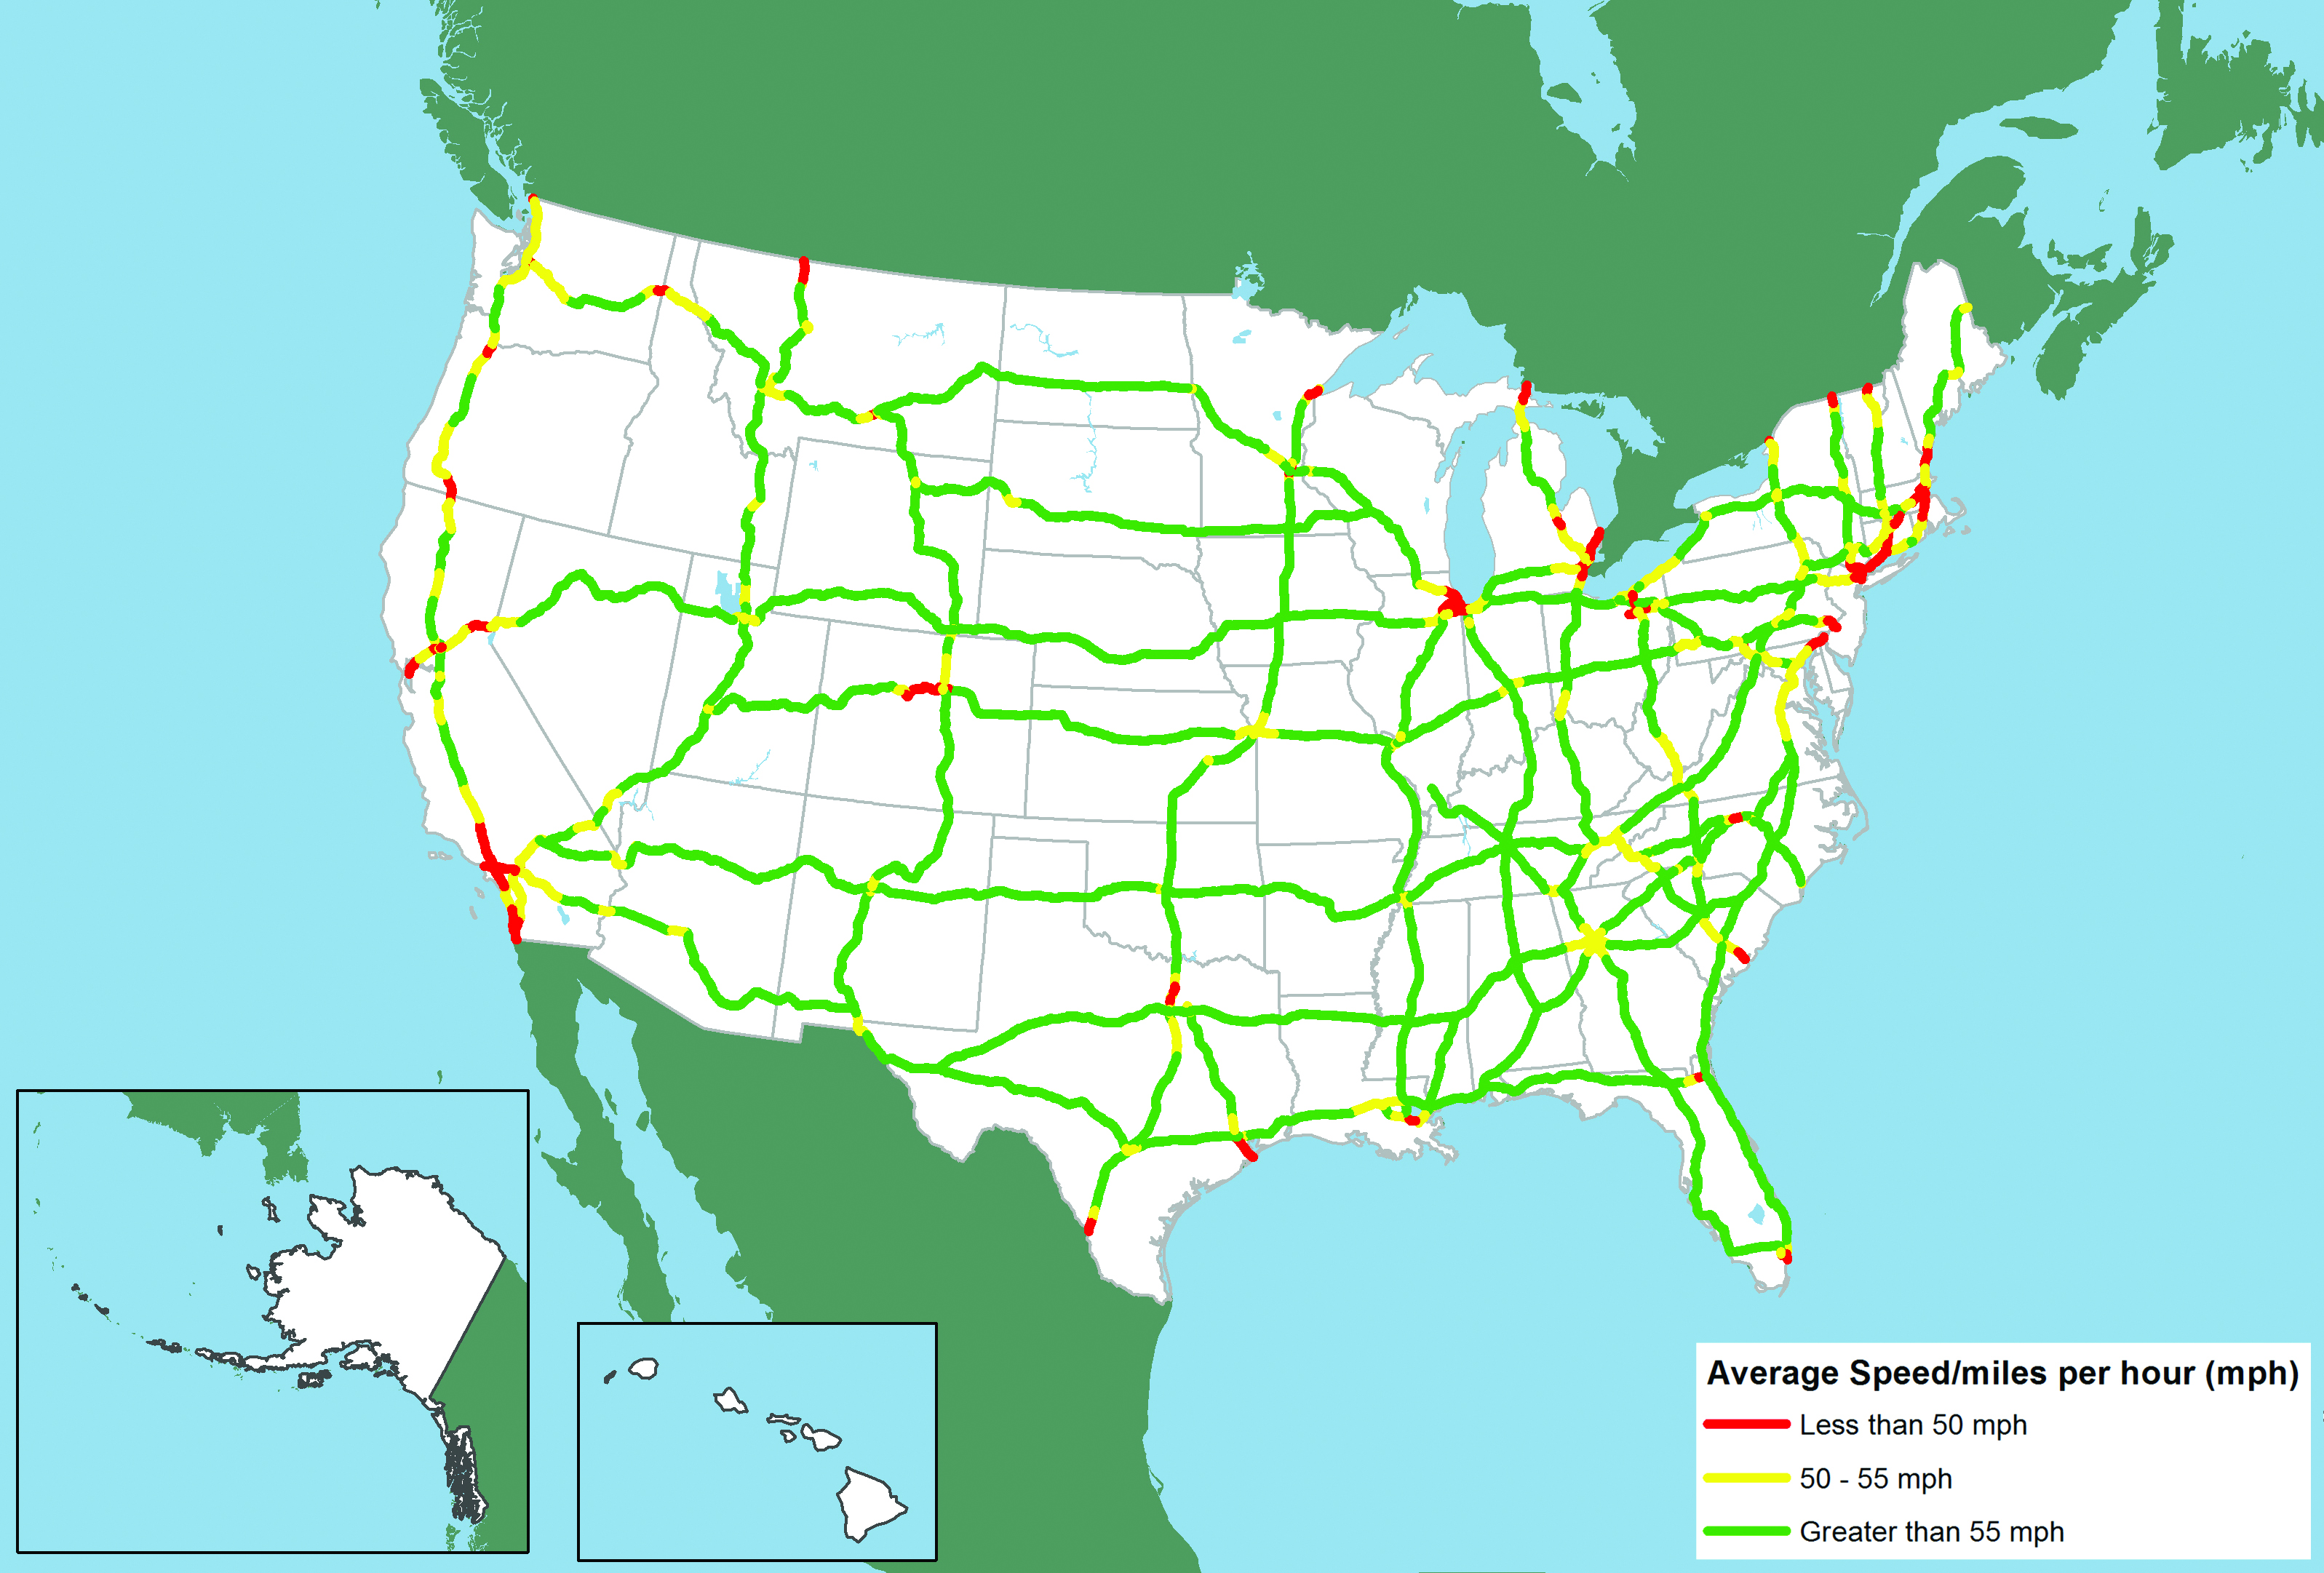 The image is a map of the speeds on interstates in the US.  Most sections of interstate are in green; denoting average speeds greater than 55 miles per hour.  There are a few yellow sections denoting average speeds between 50–55 miles an hour near cities such as Atlanta and Washington DC.  There are also some red sections denoting speeds less than 50 miles per hour.  These appear near major cities with the most red around Southern California and Eastern Seaboard cities like New York and Boston.